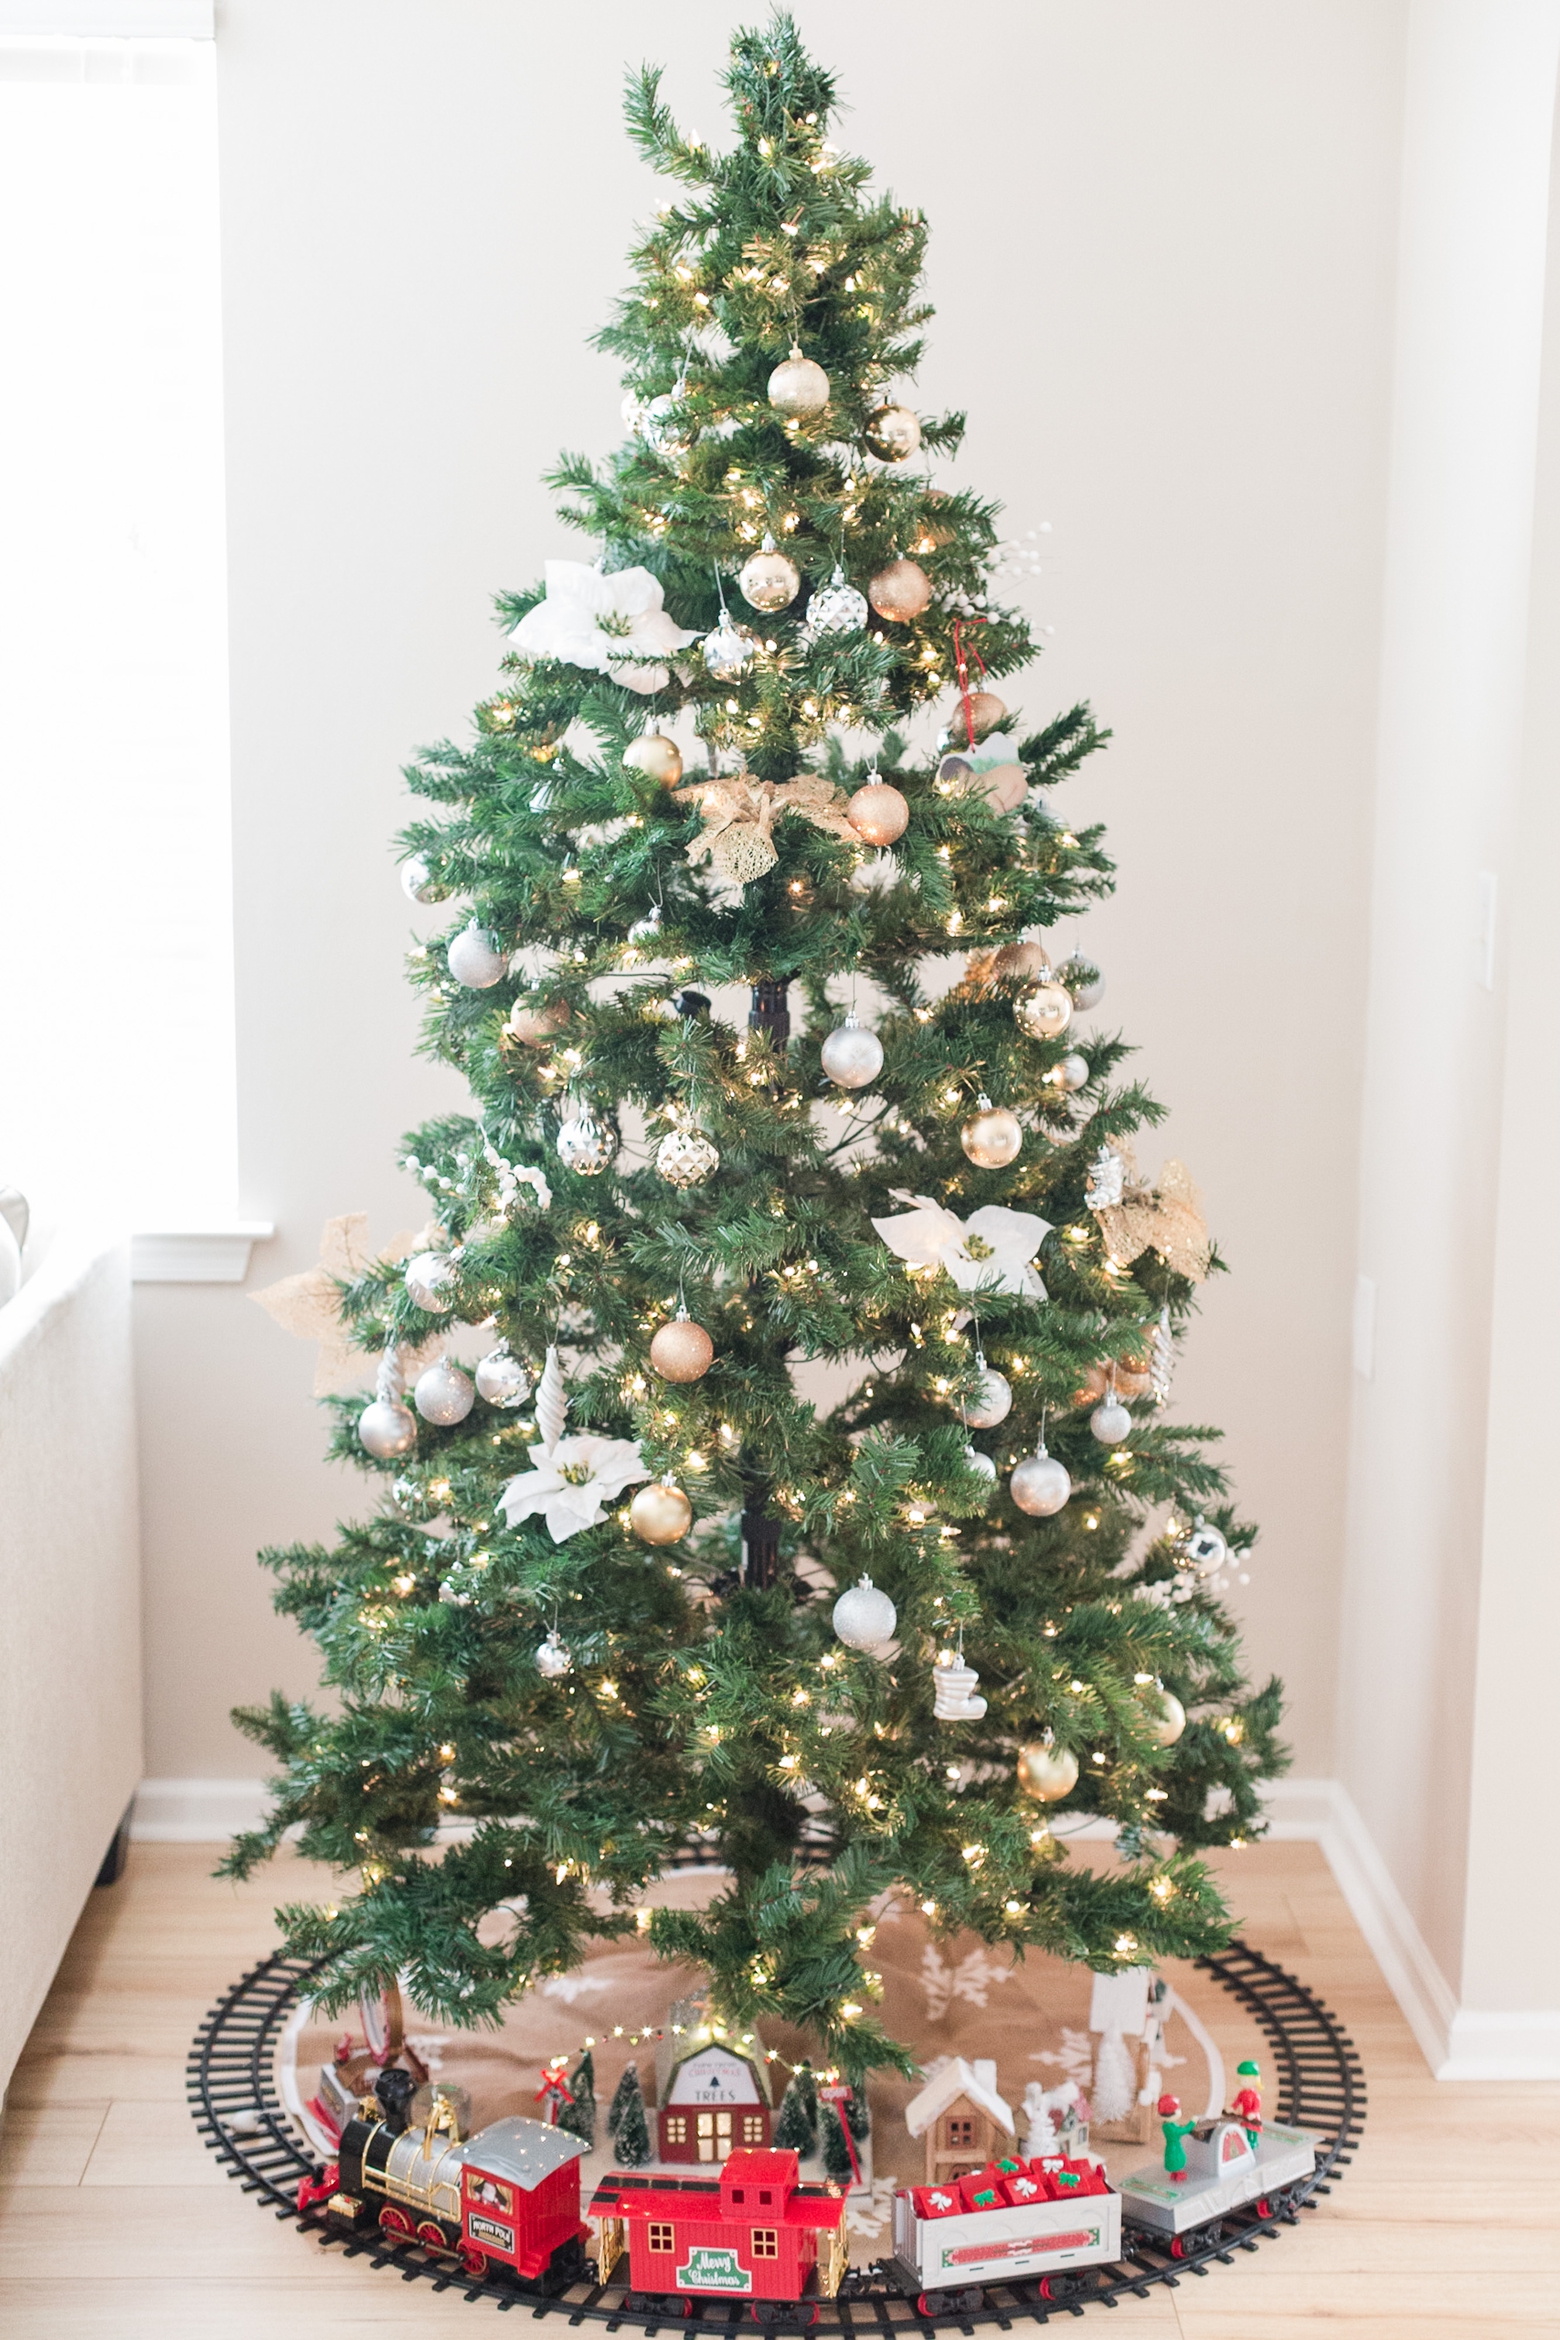 Bright and Airy Christmas Decor. Neutral colors with pops of green and gold!